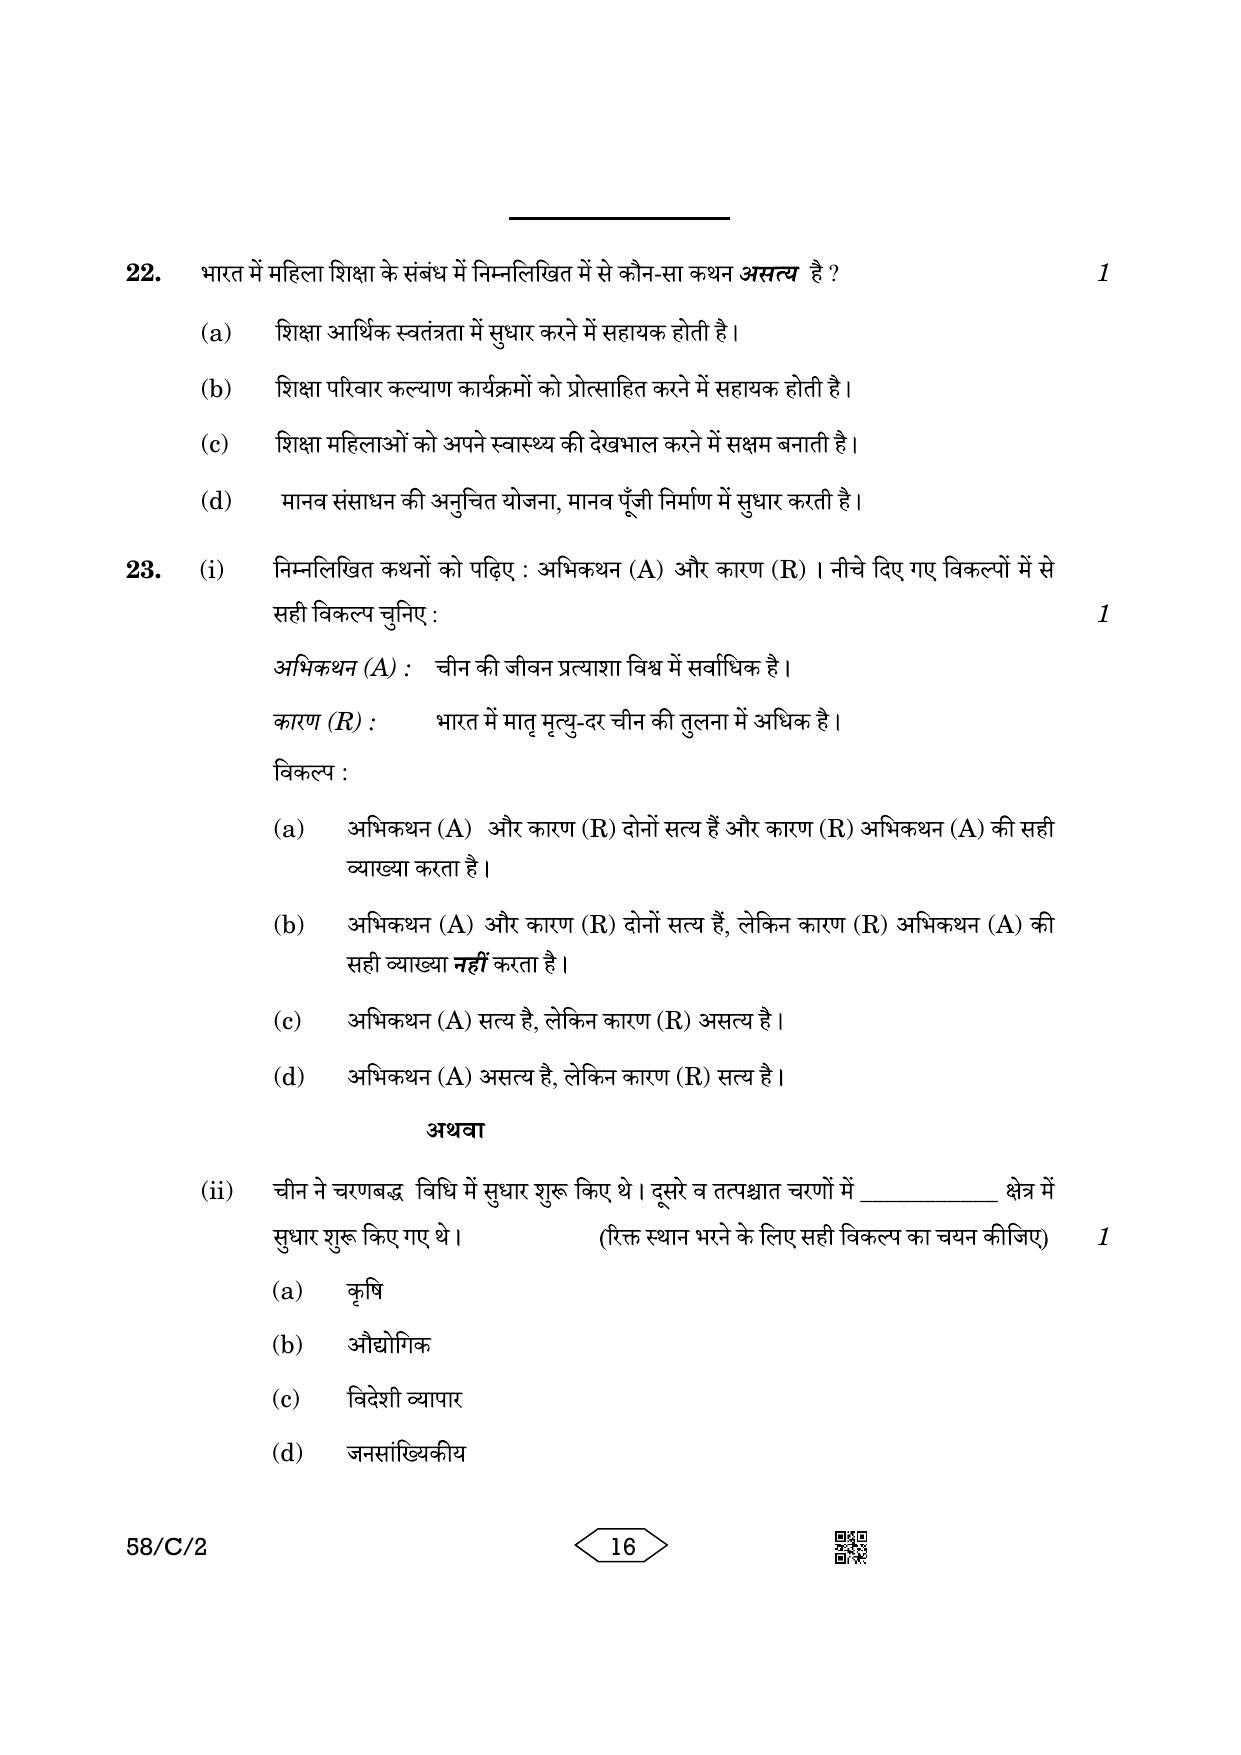 CBSE Class 12 58-2 Chemistry 2023 (Compartment) Question Paper - Page 16